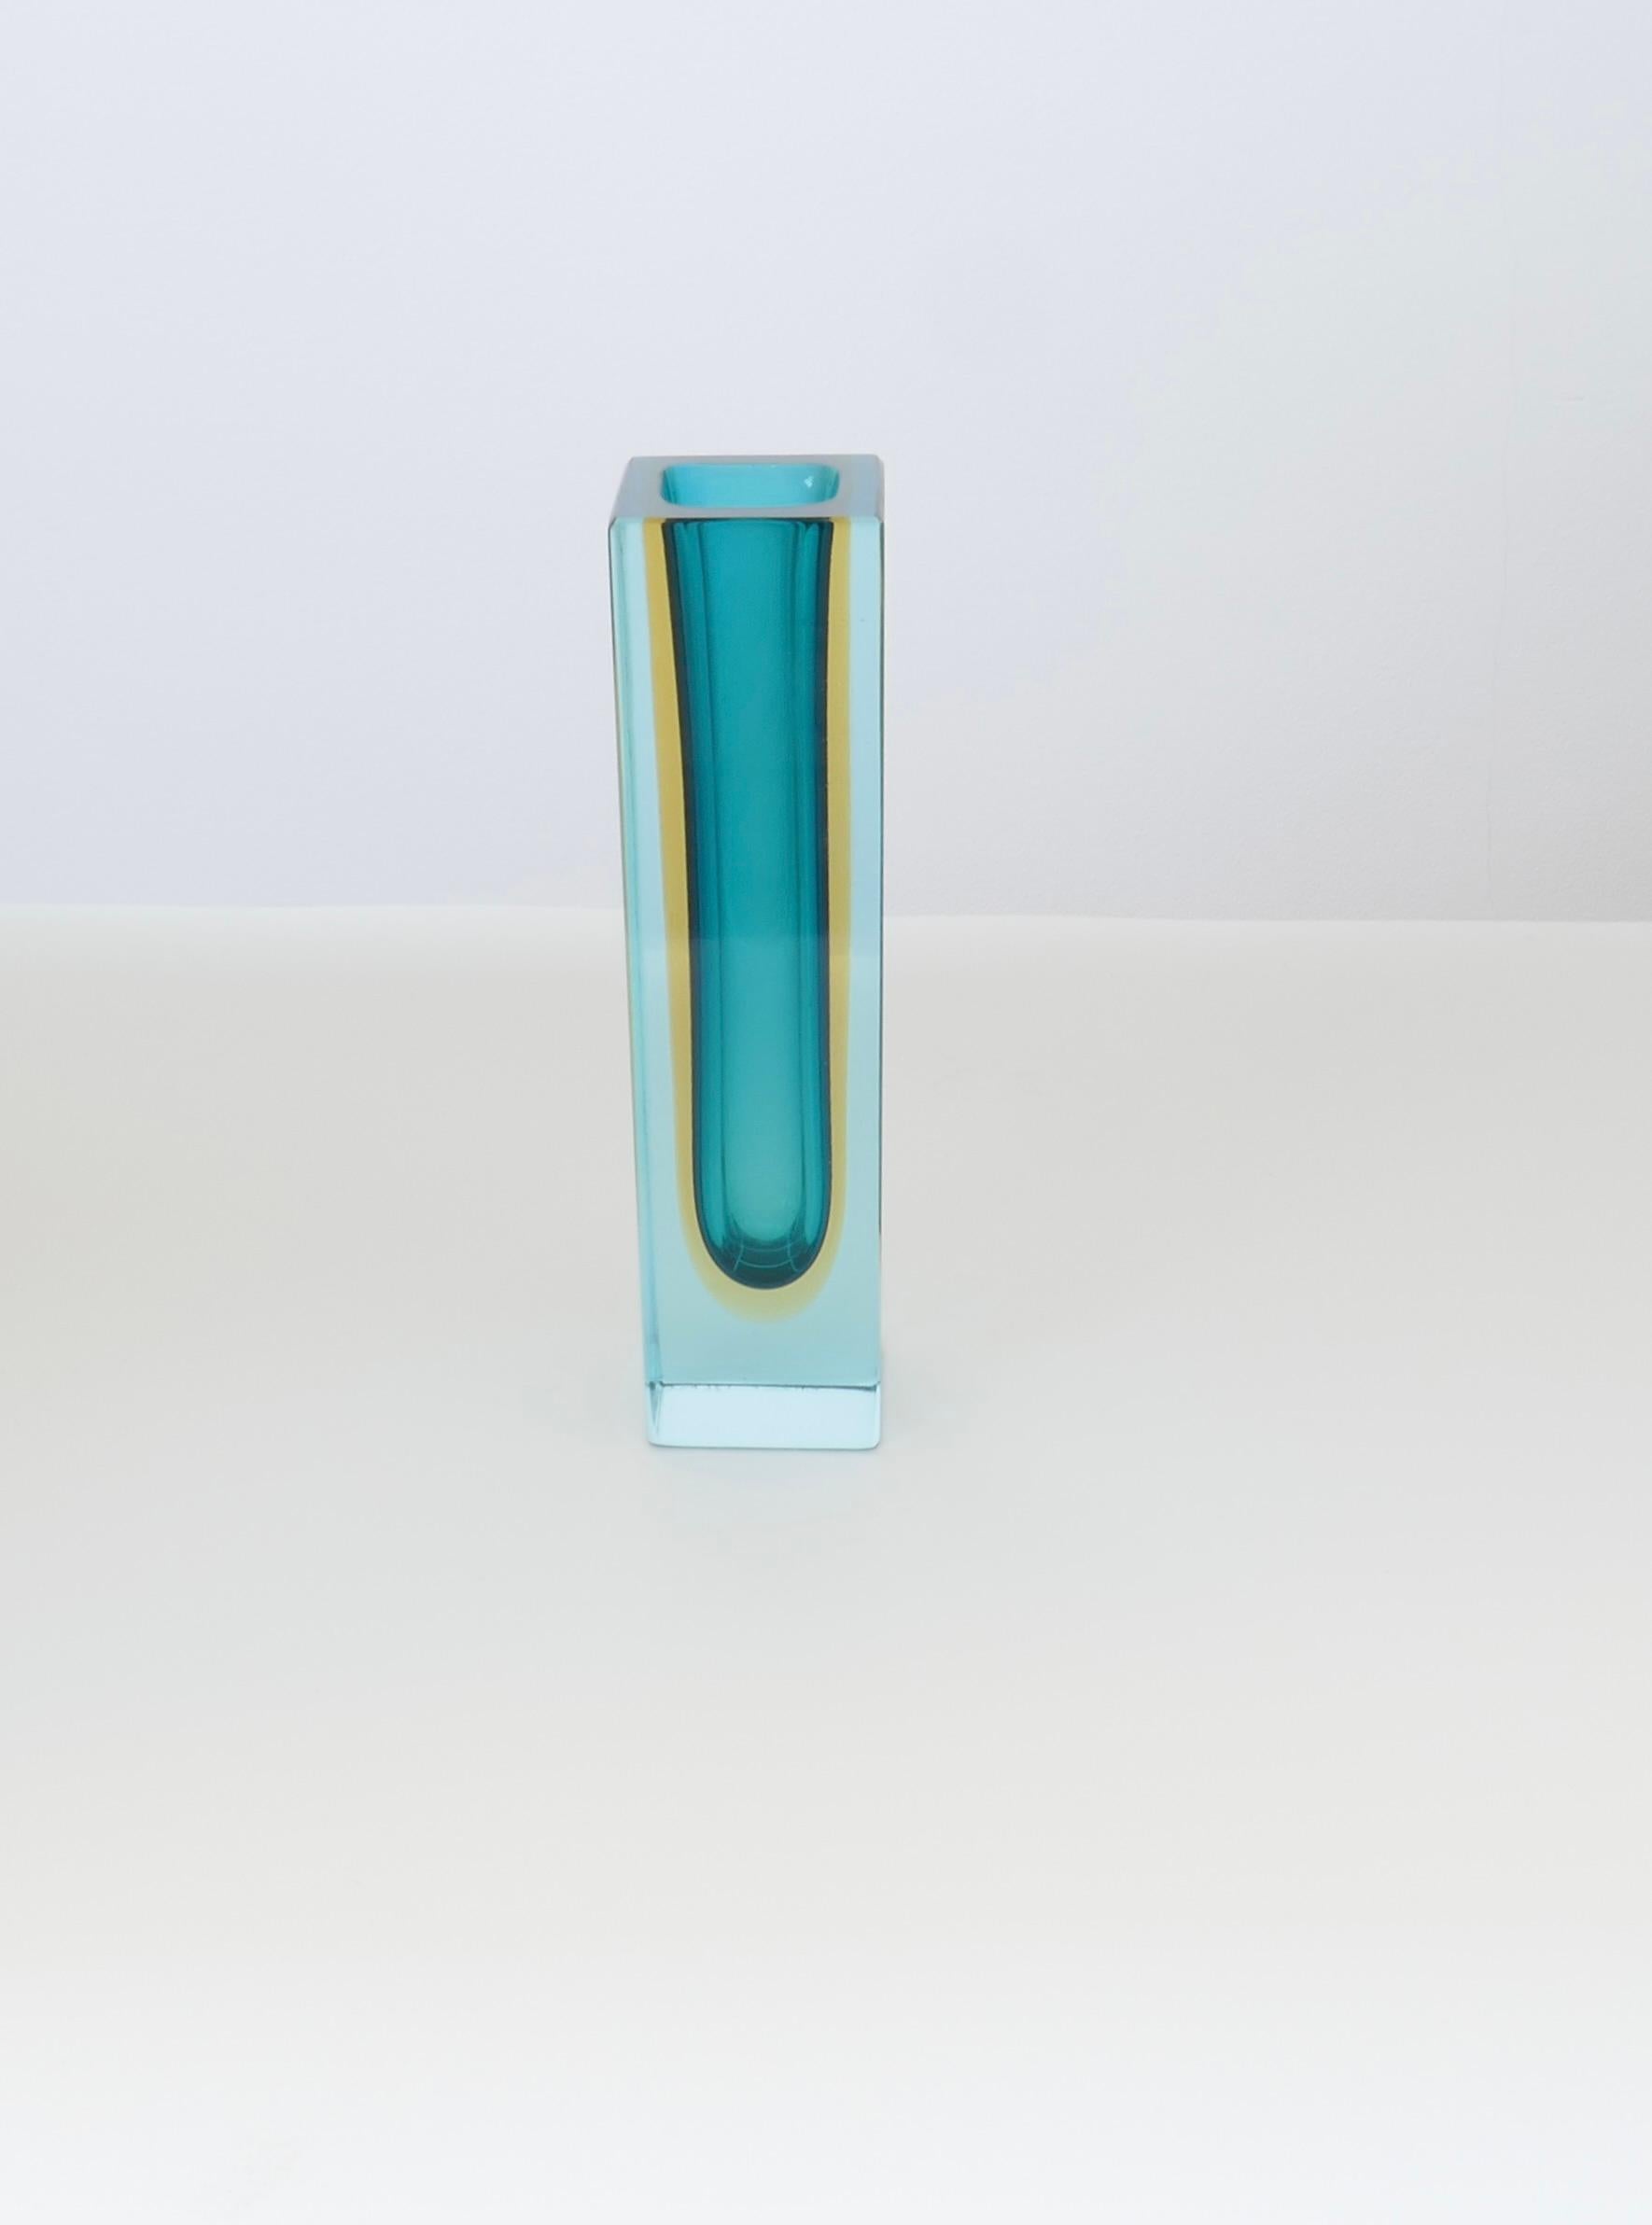 Soliflore Sommerso ( blue , amber, clear) Vase signed by Flavio Poli and dated 1961. 
Italian glass artist Flavio Poli (1900-1980) is praised for his contribution to the development of Murano glass , championing a new style during the 1950s known